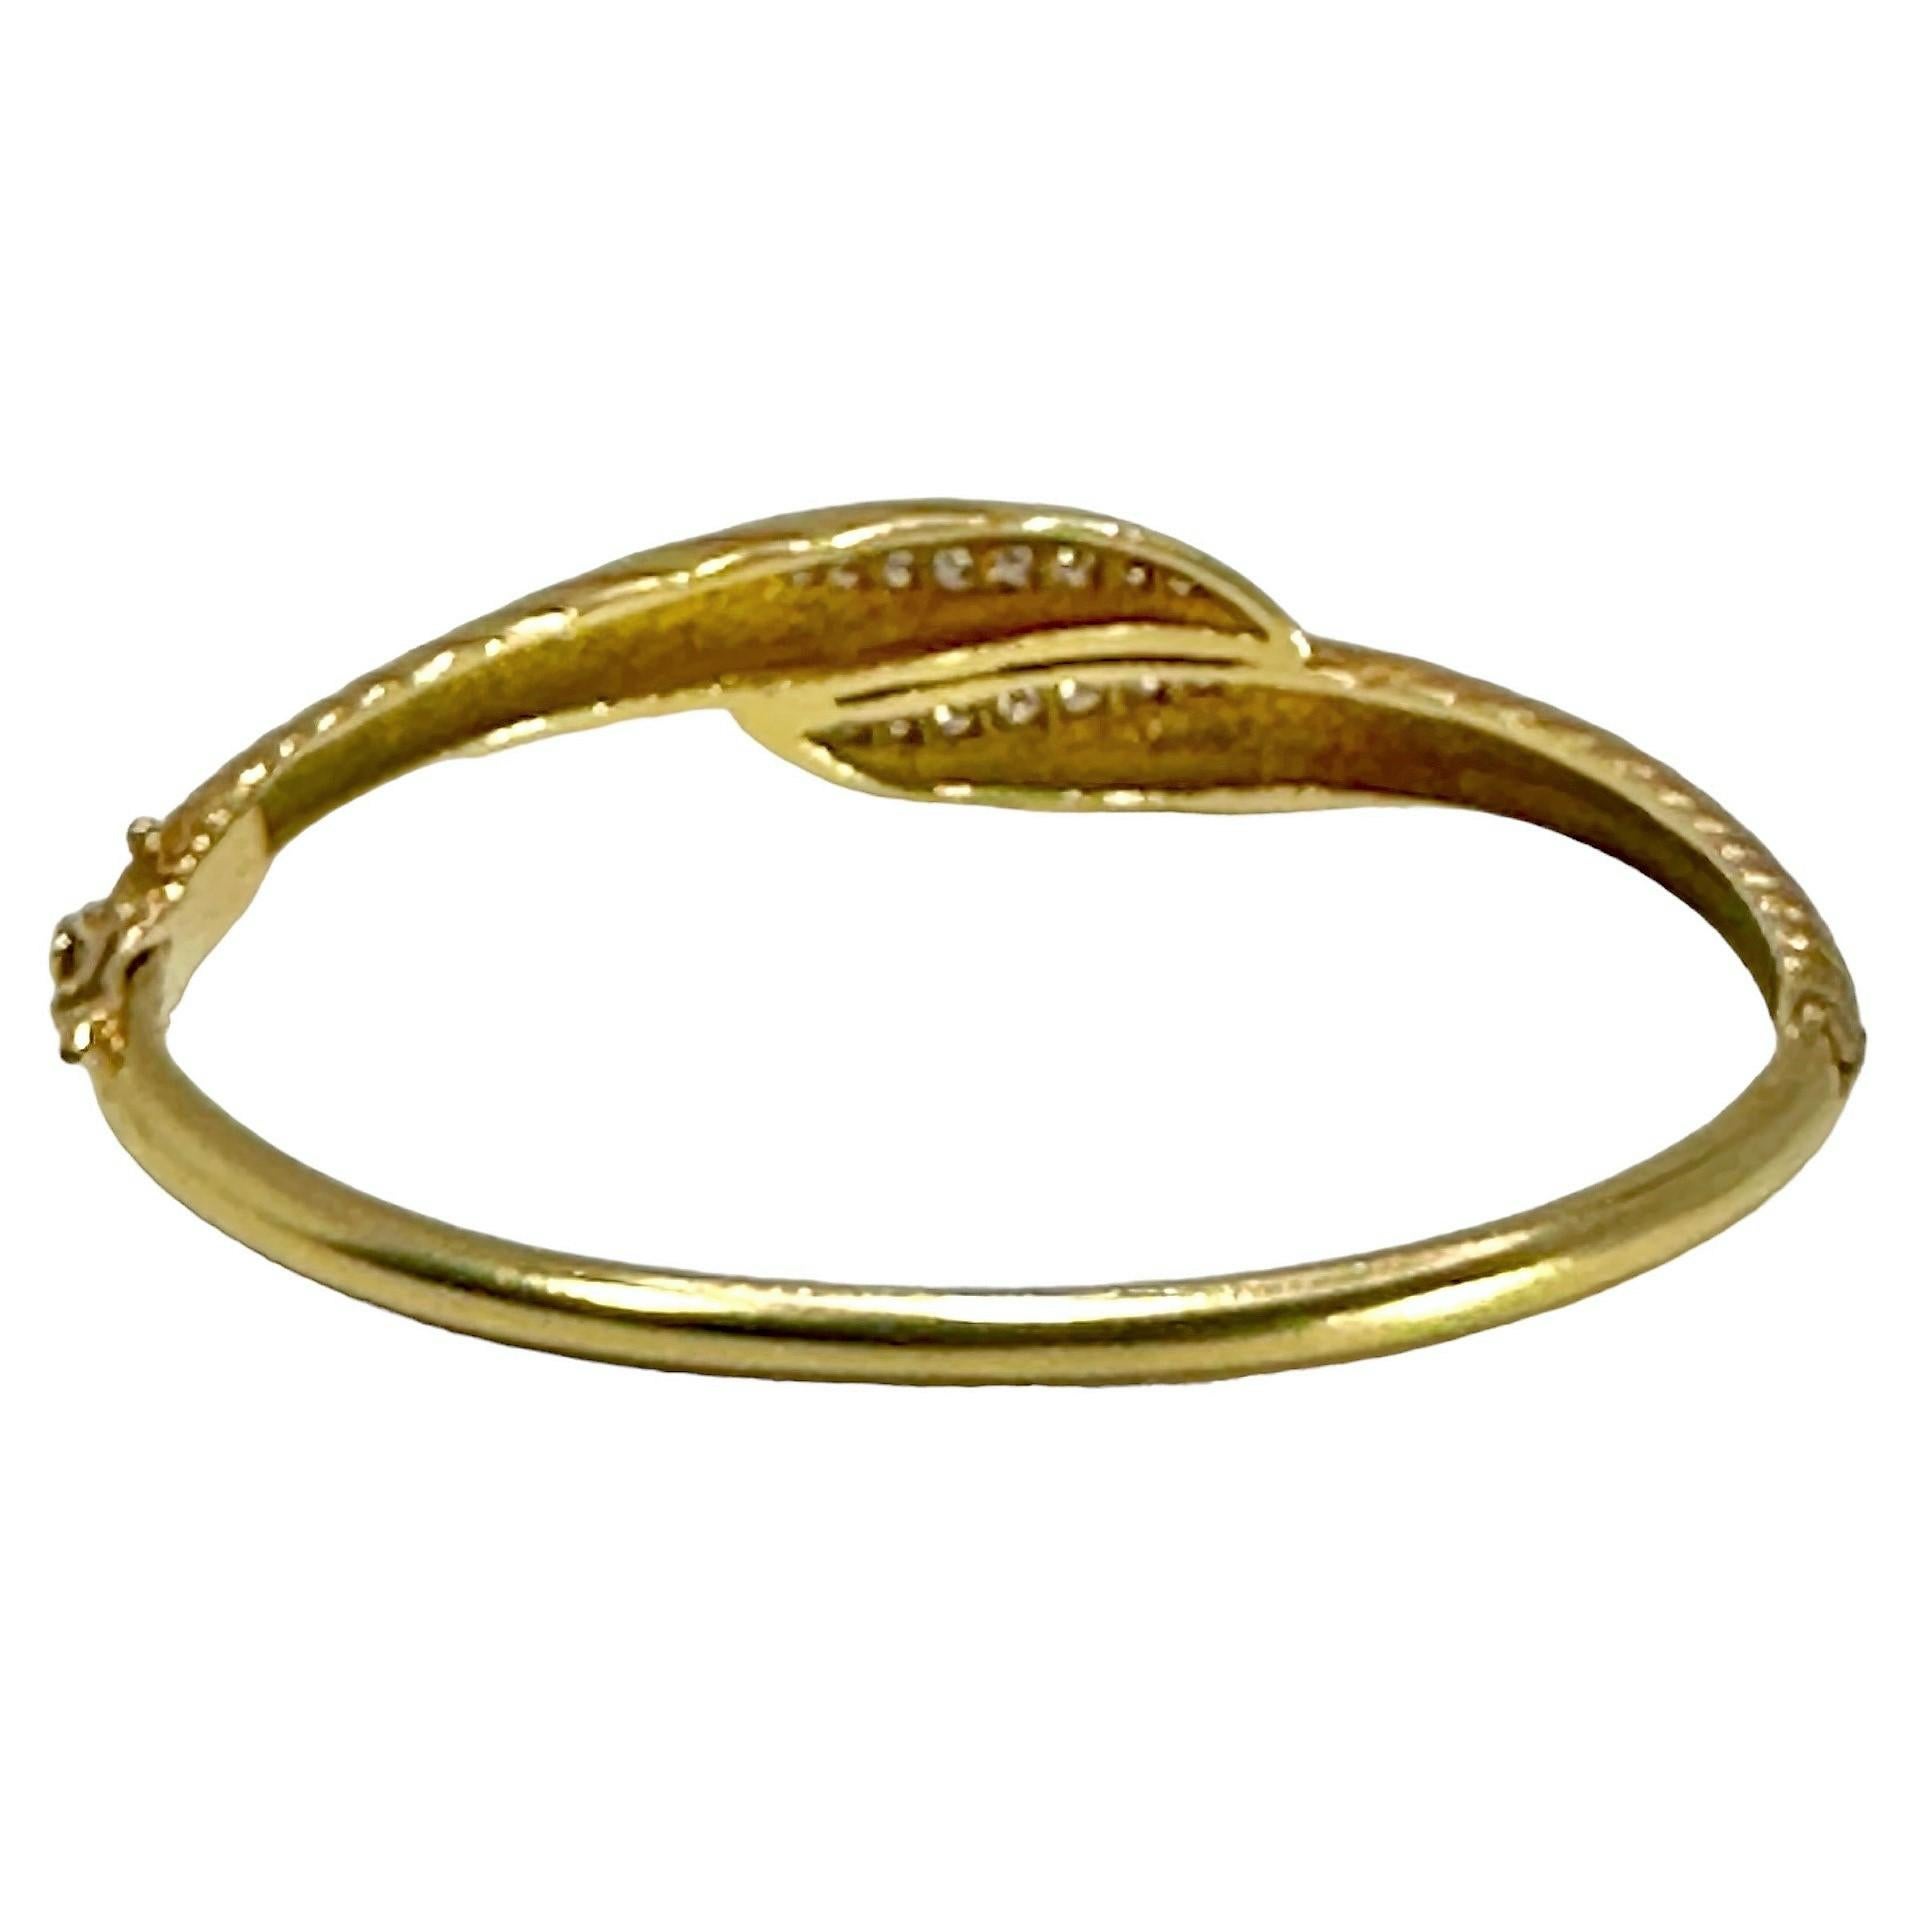 Brilliant Cut Delicate Vintage French Mid-20th Century Gold and Diamond Bangle Bracelet For Sale